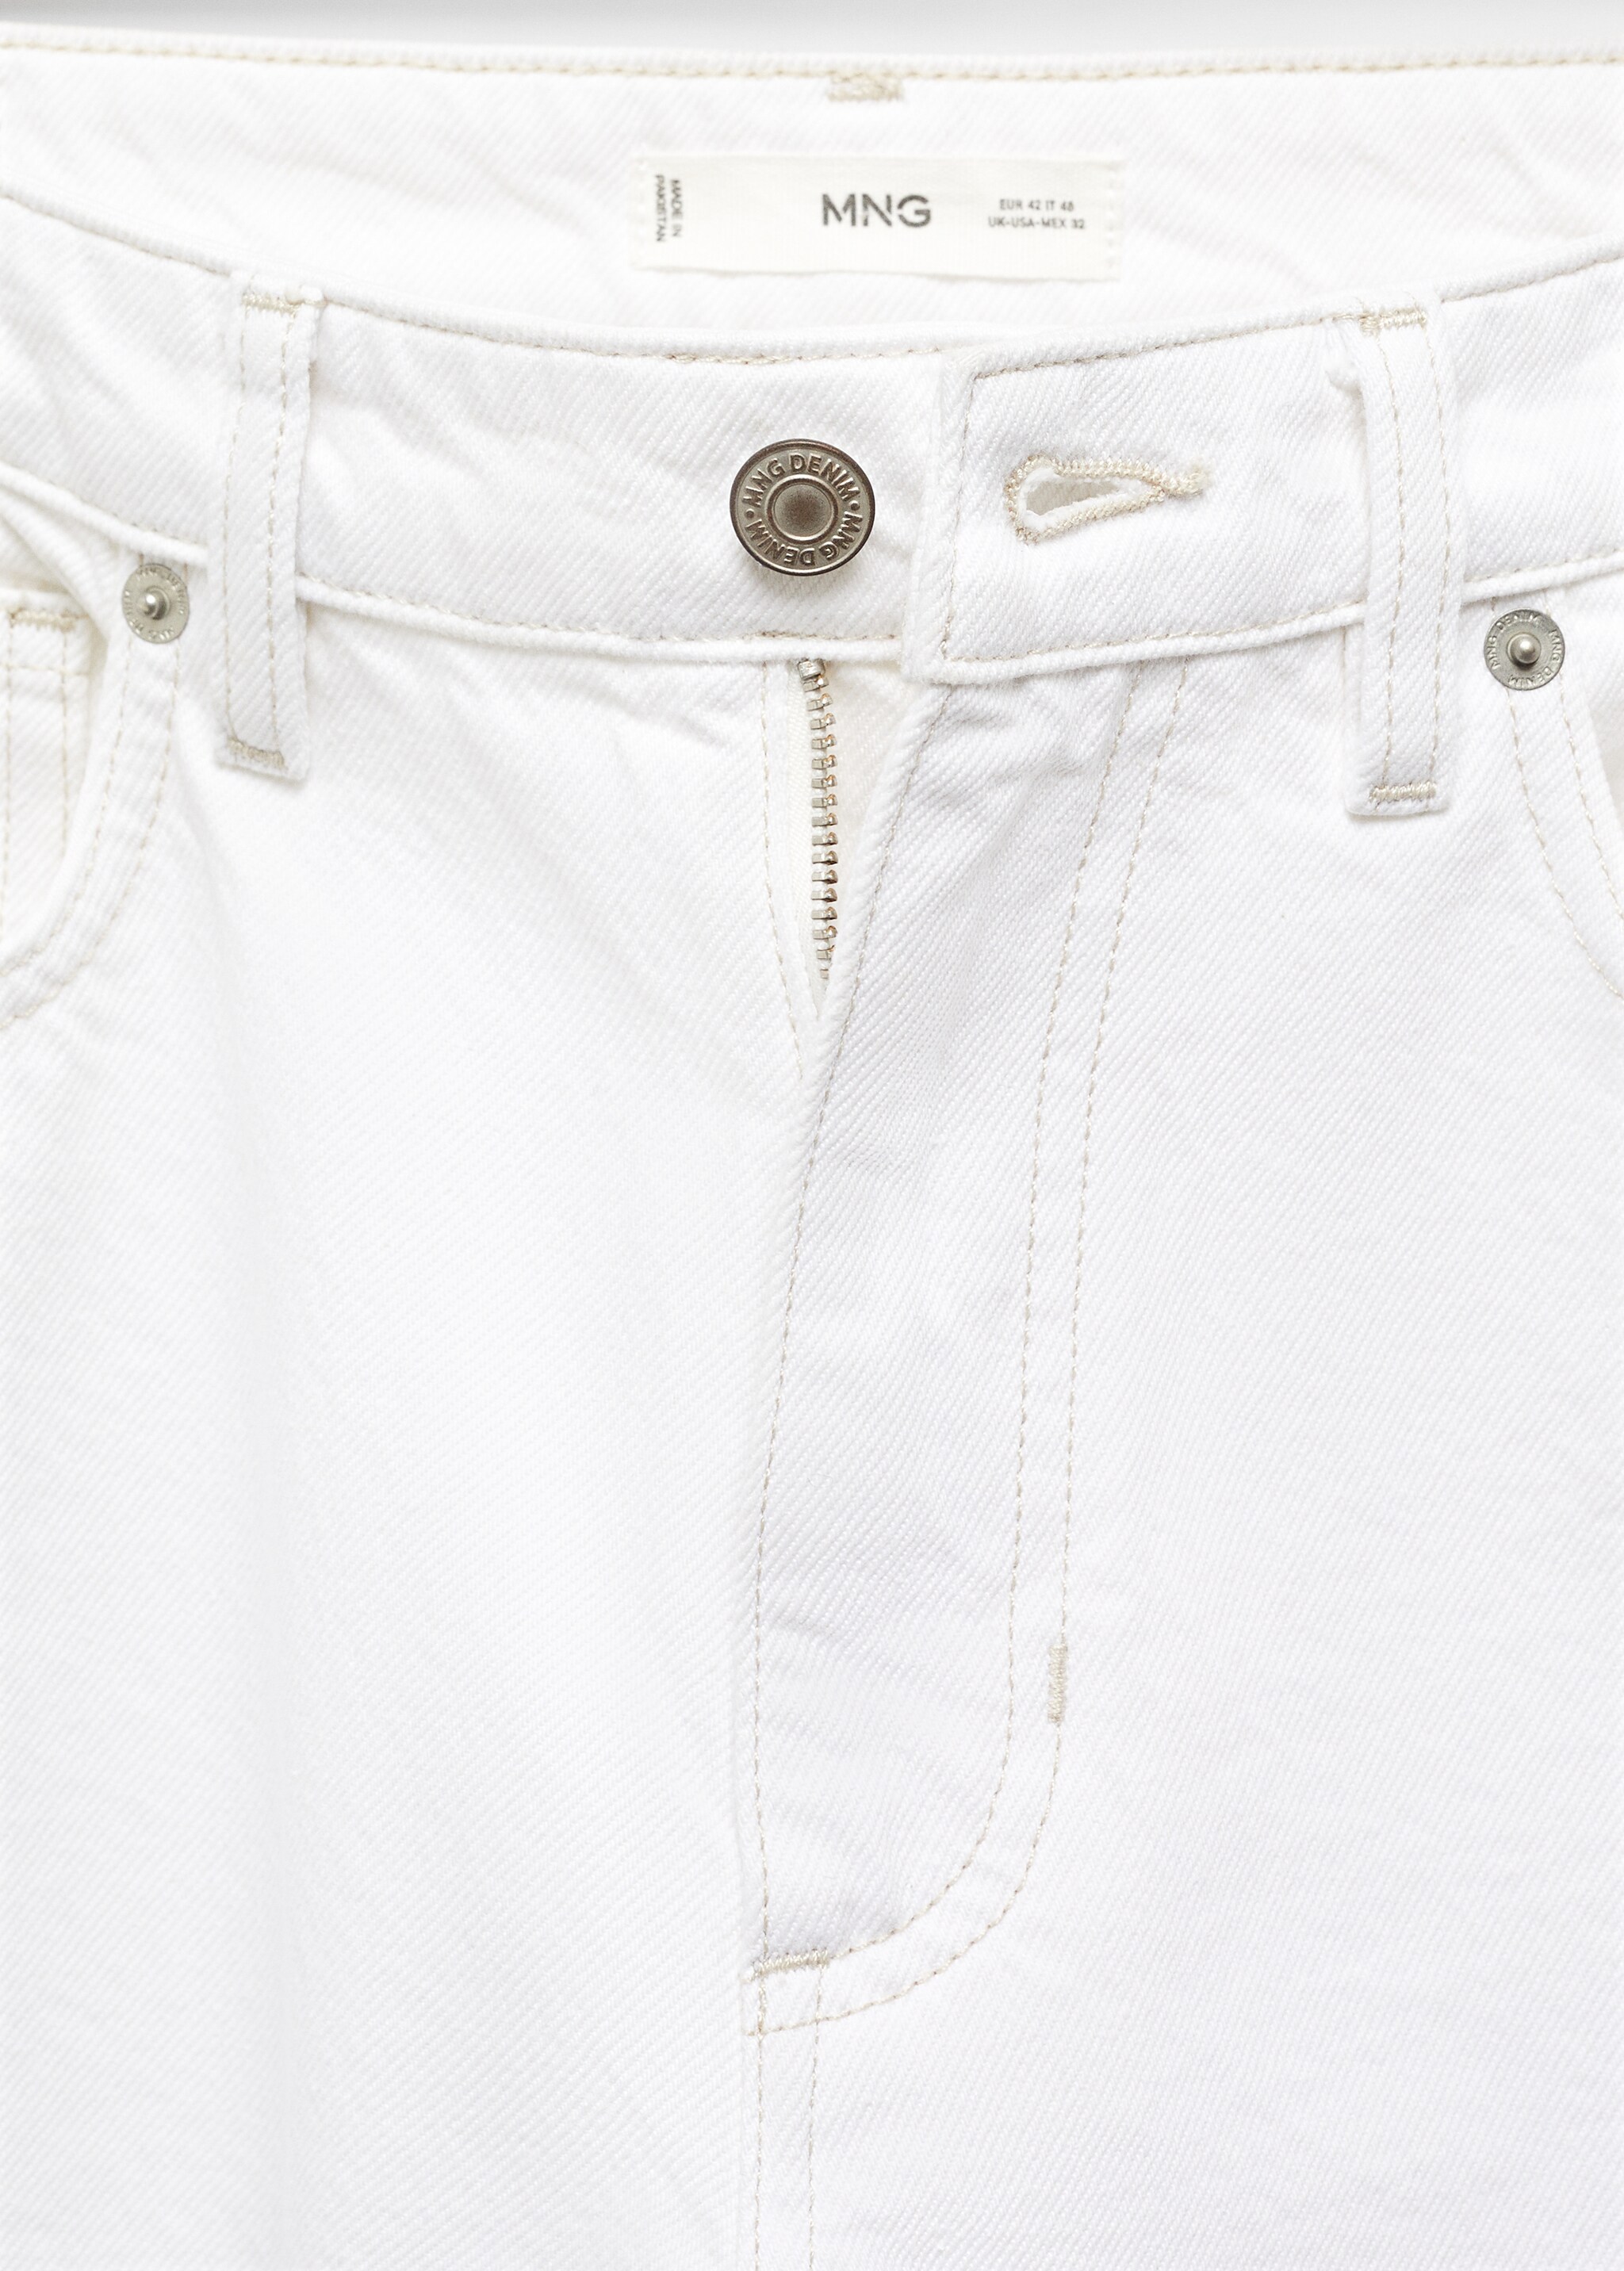 Sam tapper fit jeans - Details of the article 8